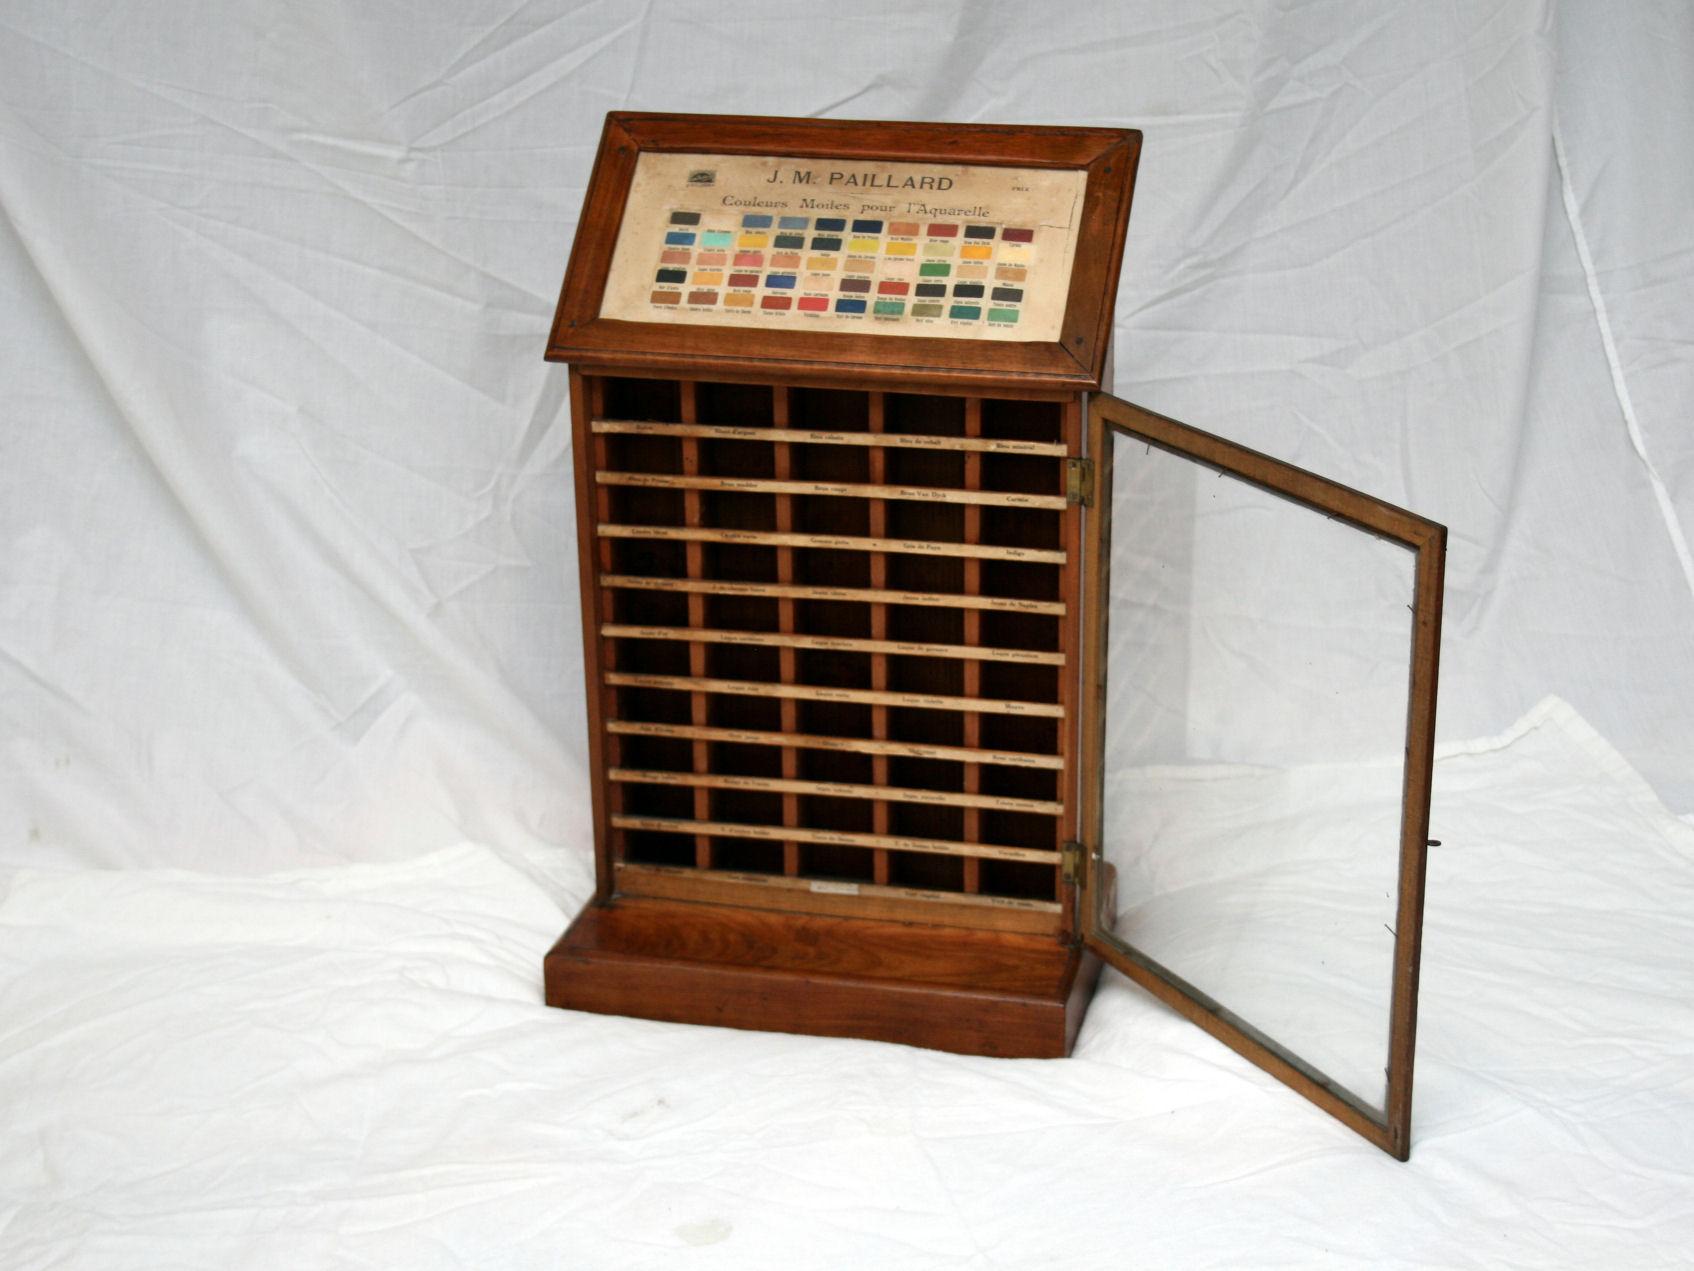 Fabulous and rare, this is a counter-top display case made from fruitwood was used to display a range of paint colors for J Paillard Artist Paints.
The front door opens and this is where the blocks of paint would have been stored.

In Excellent